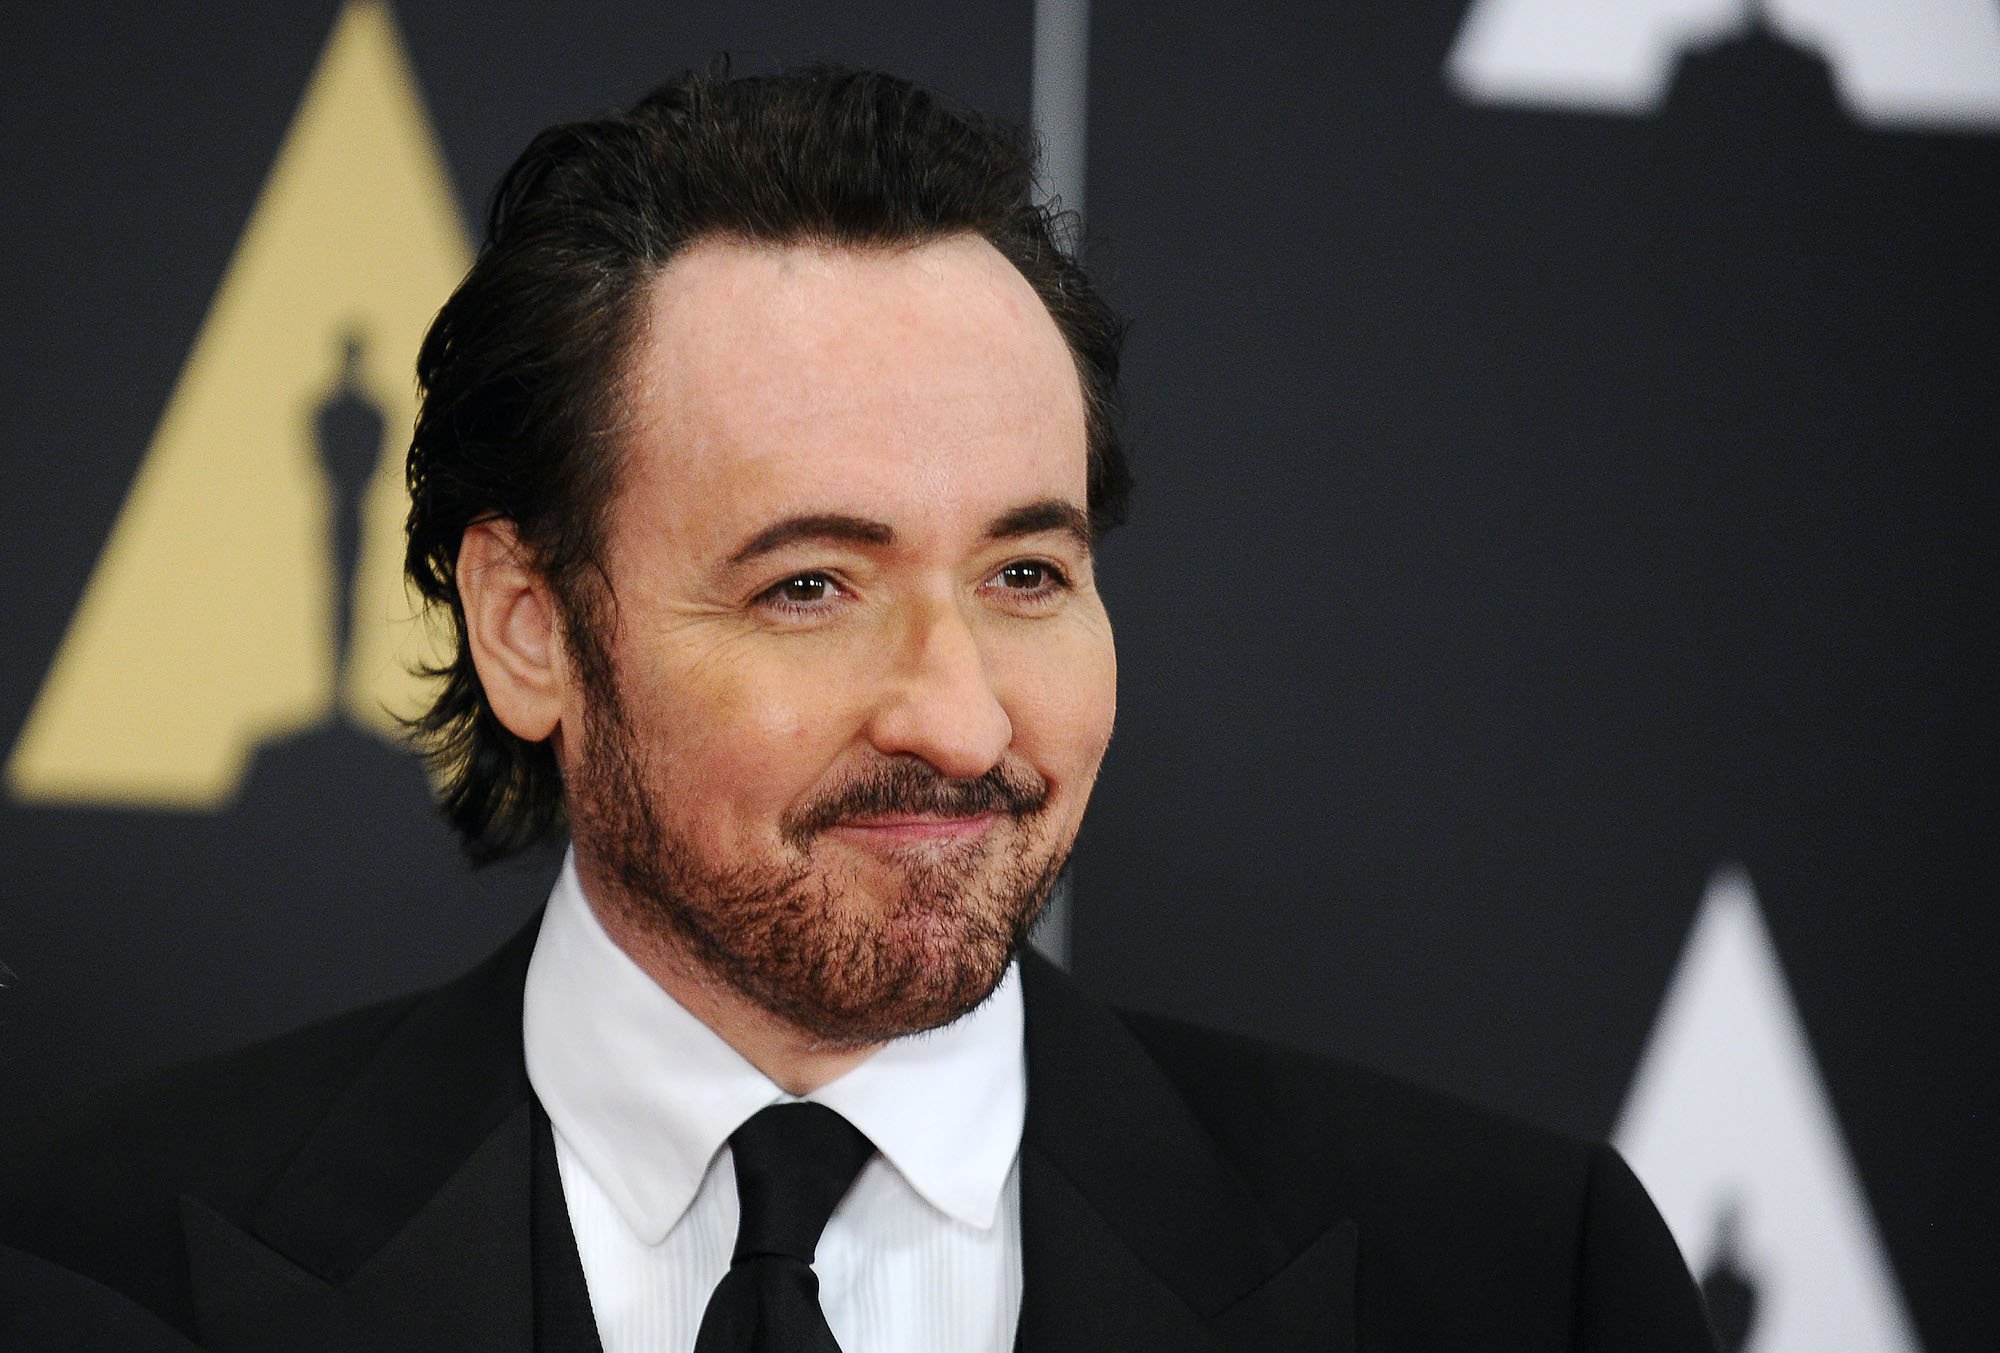 John Cusack smiling in front of a black background